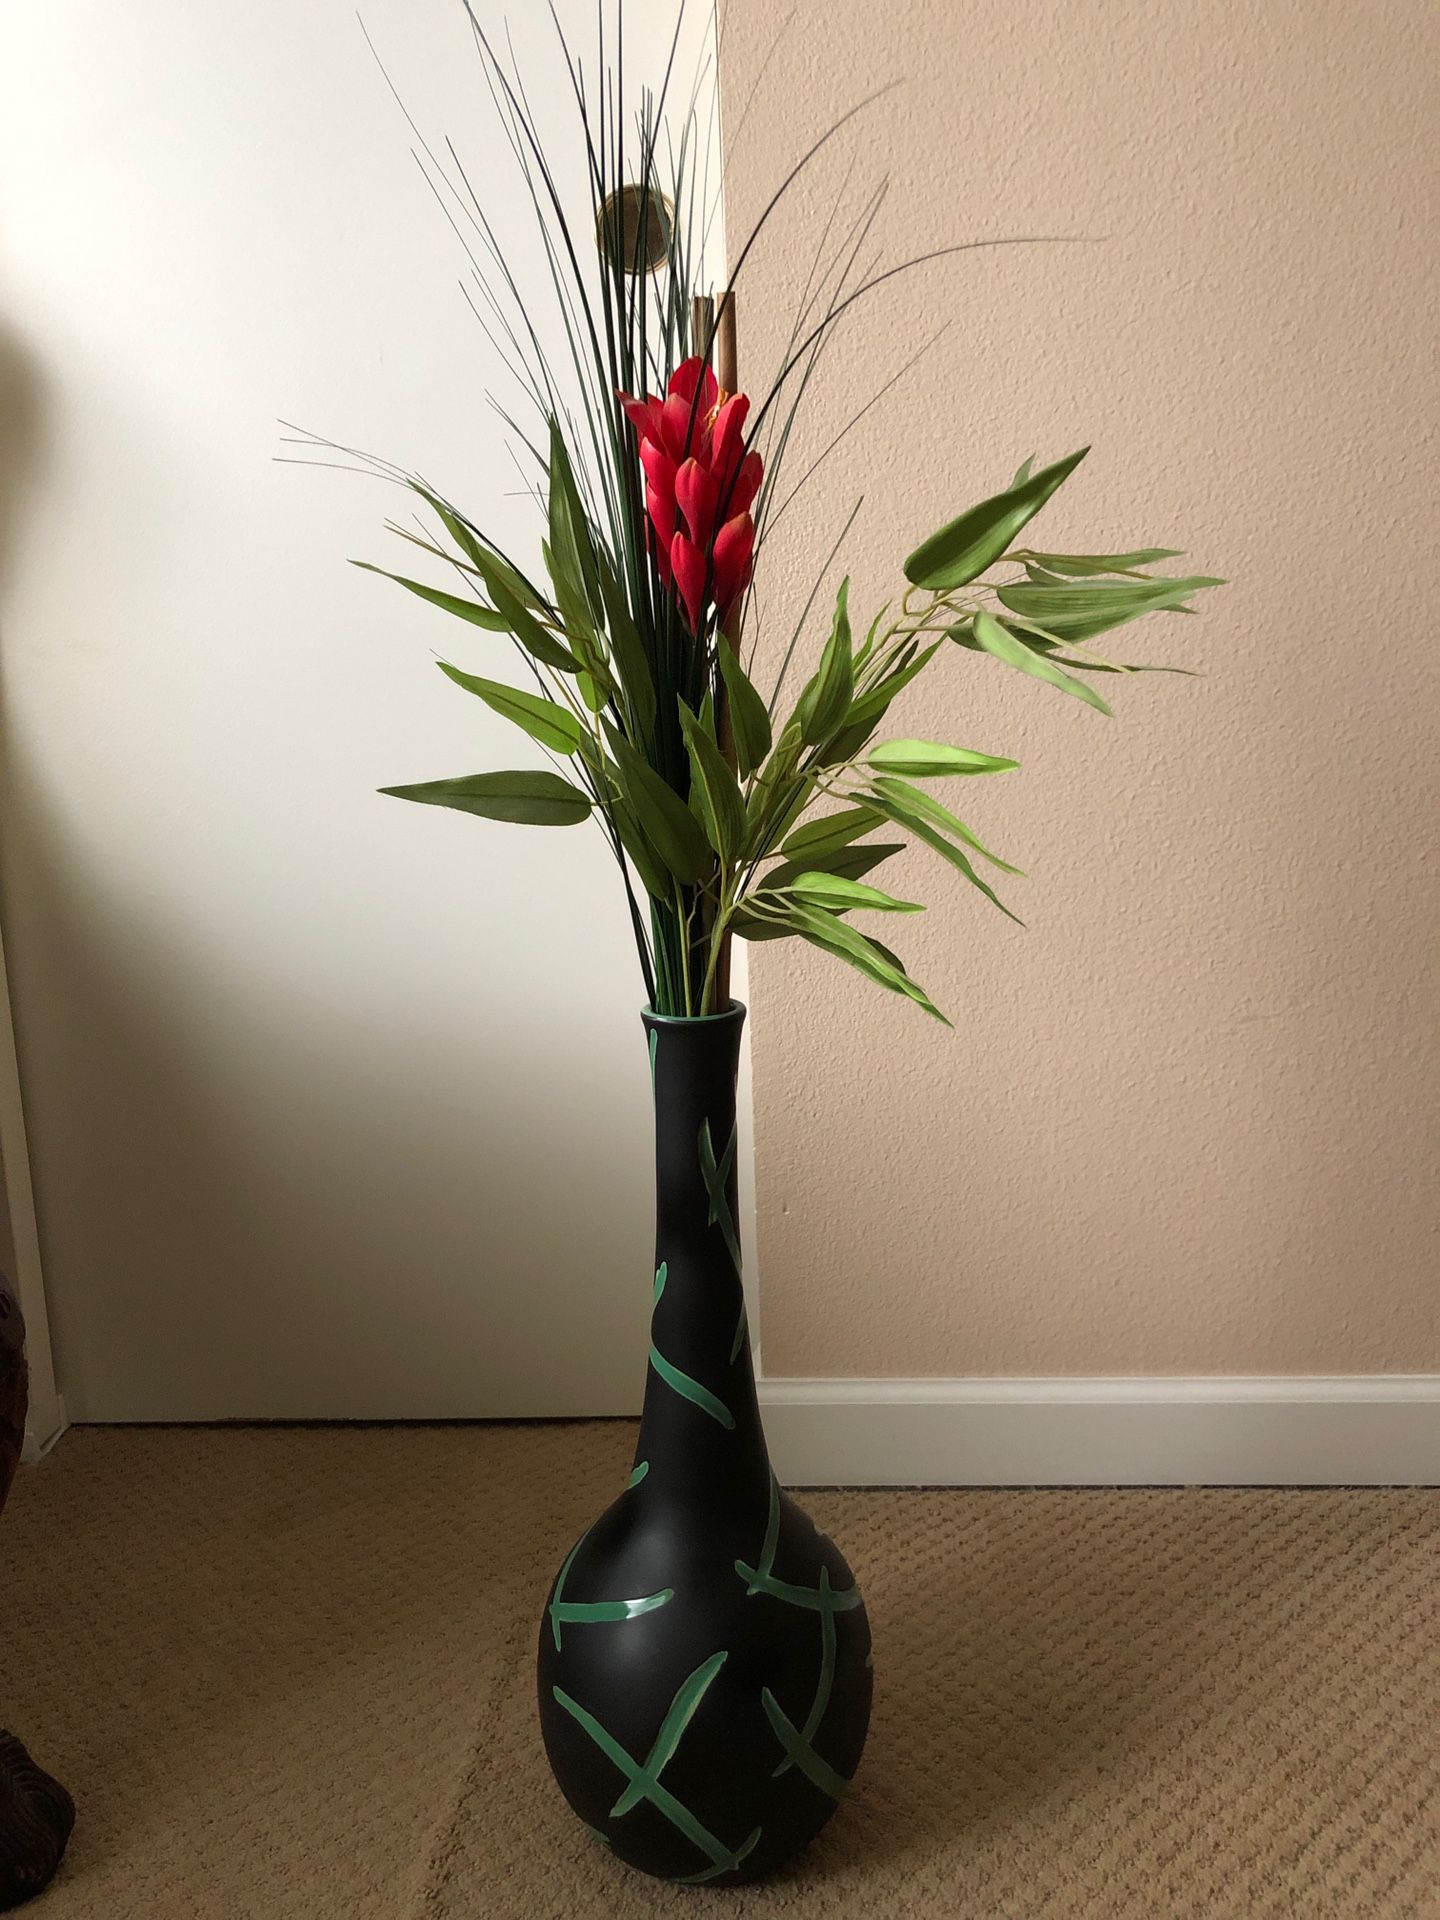 Vase with lovely flowers